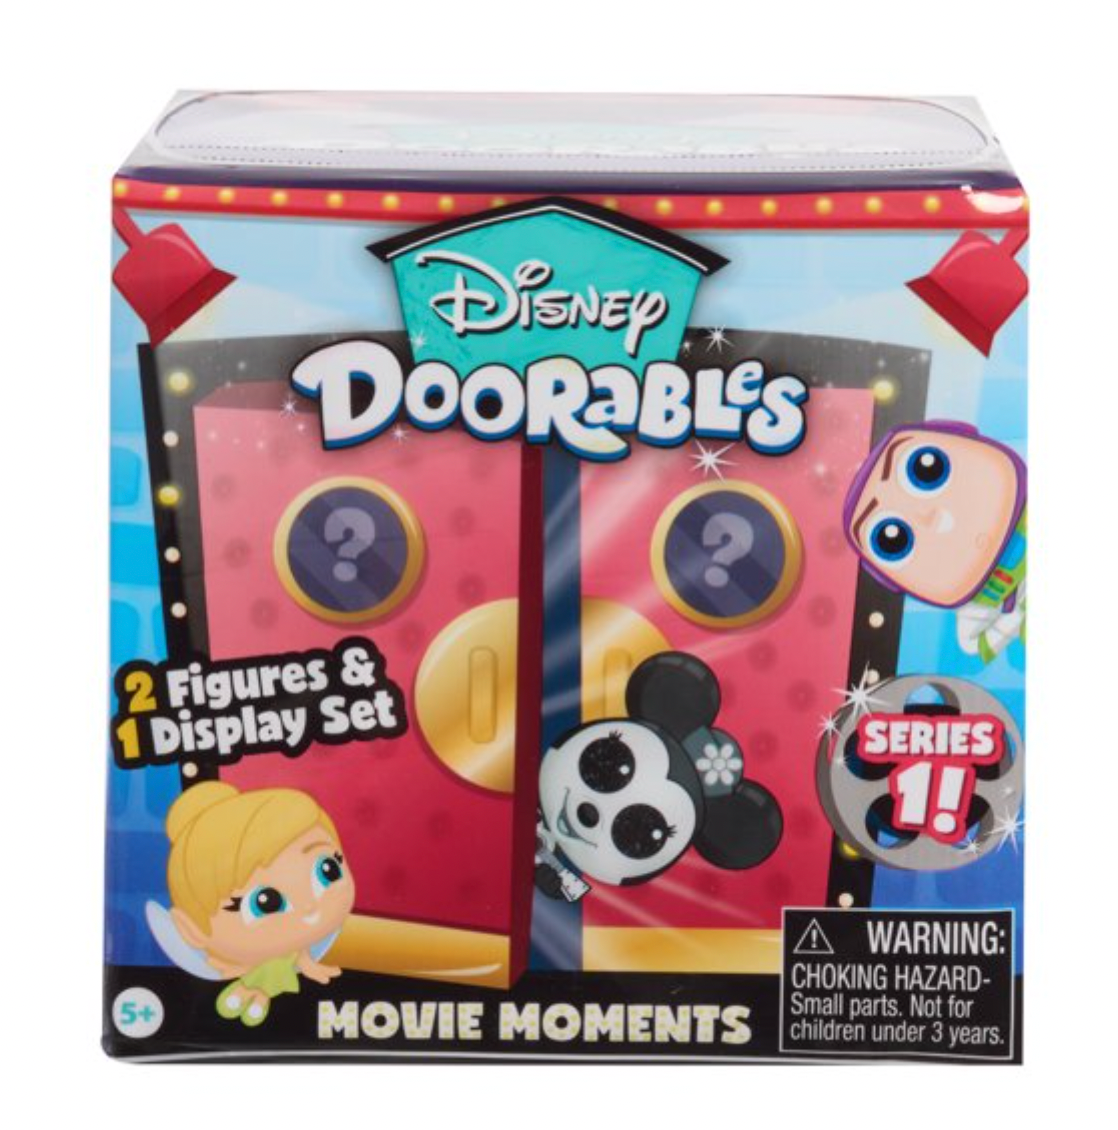 Disney Doorables Collection Peek A Goofy Movie Exclusive Mystery